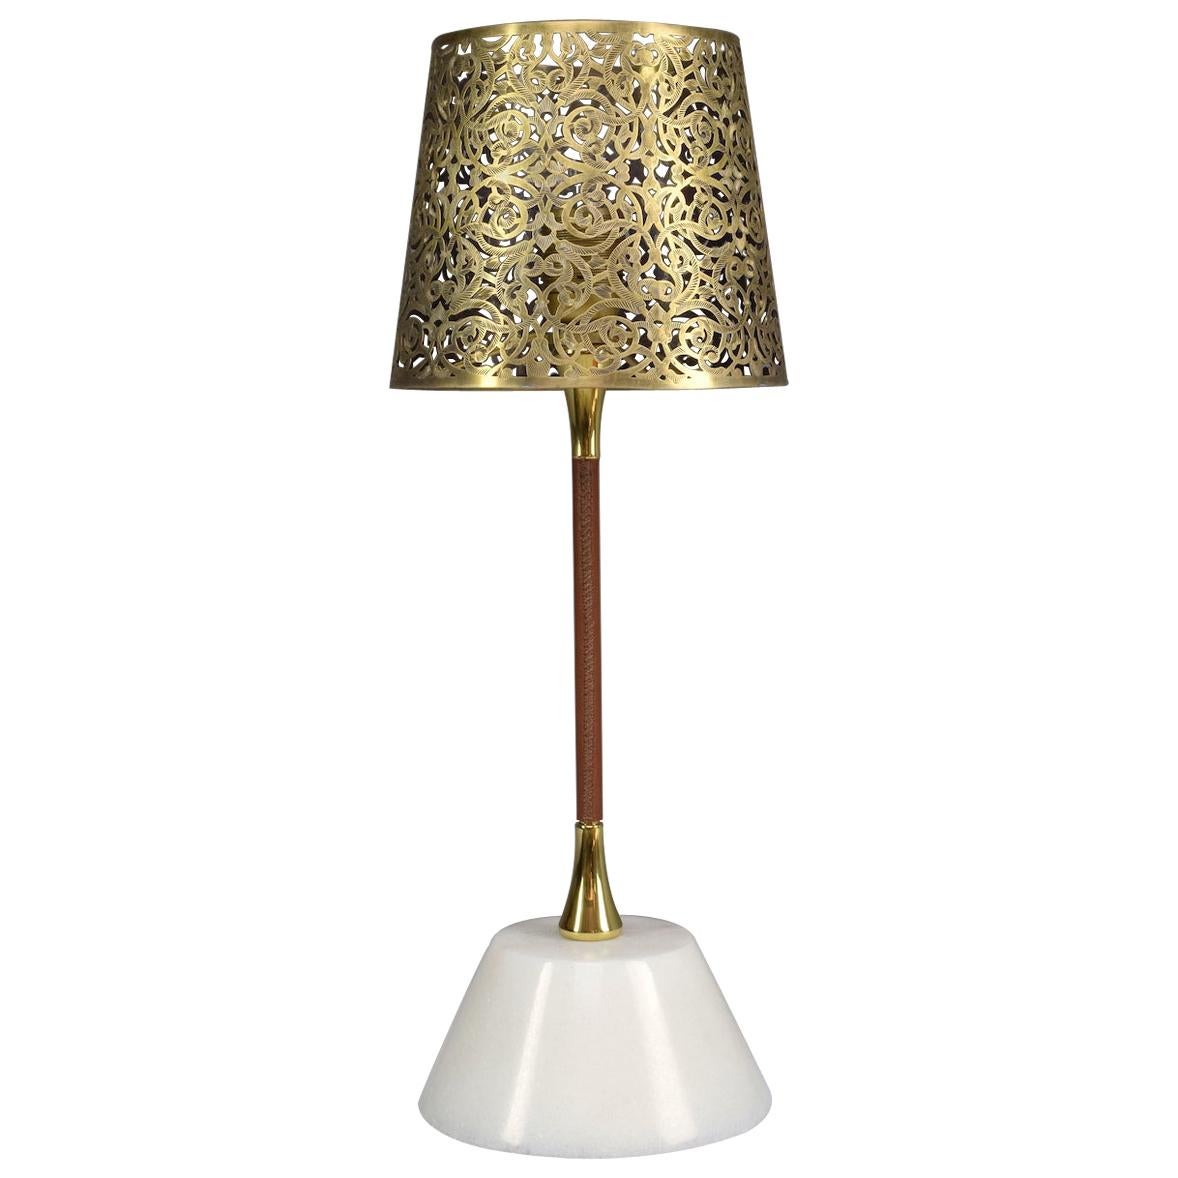 IDO-T1O Openwork Brass Table Lamp, Flow 2 Collection